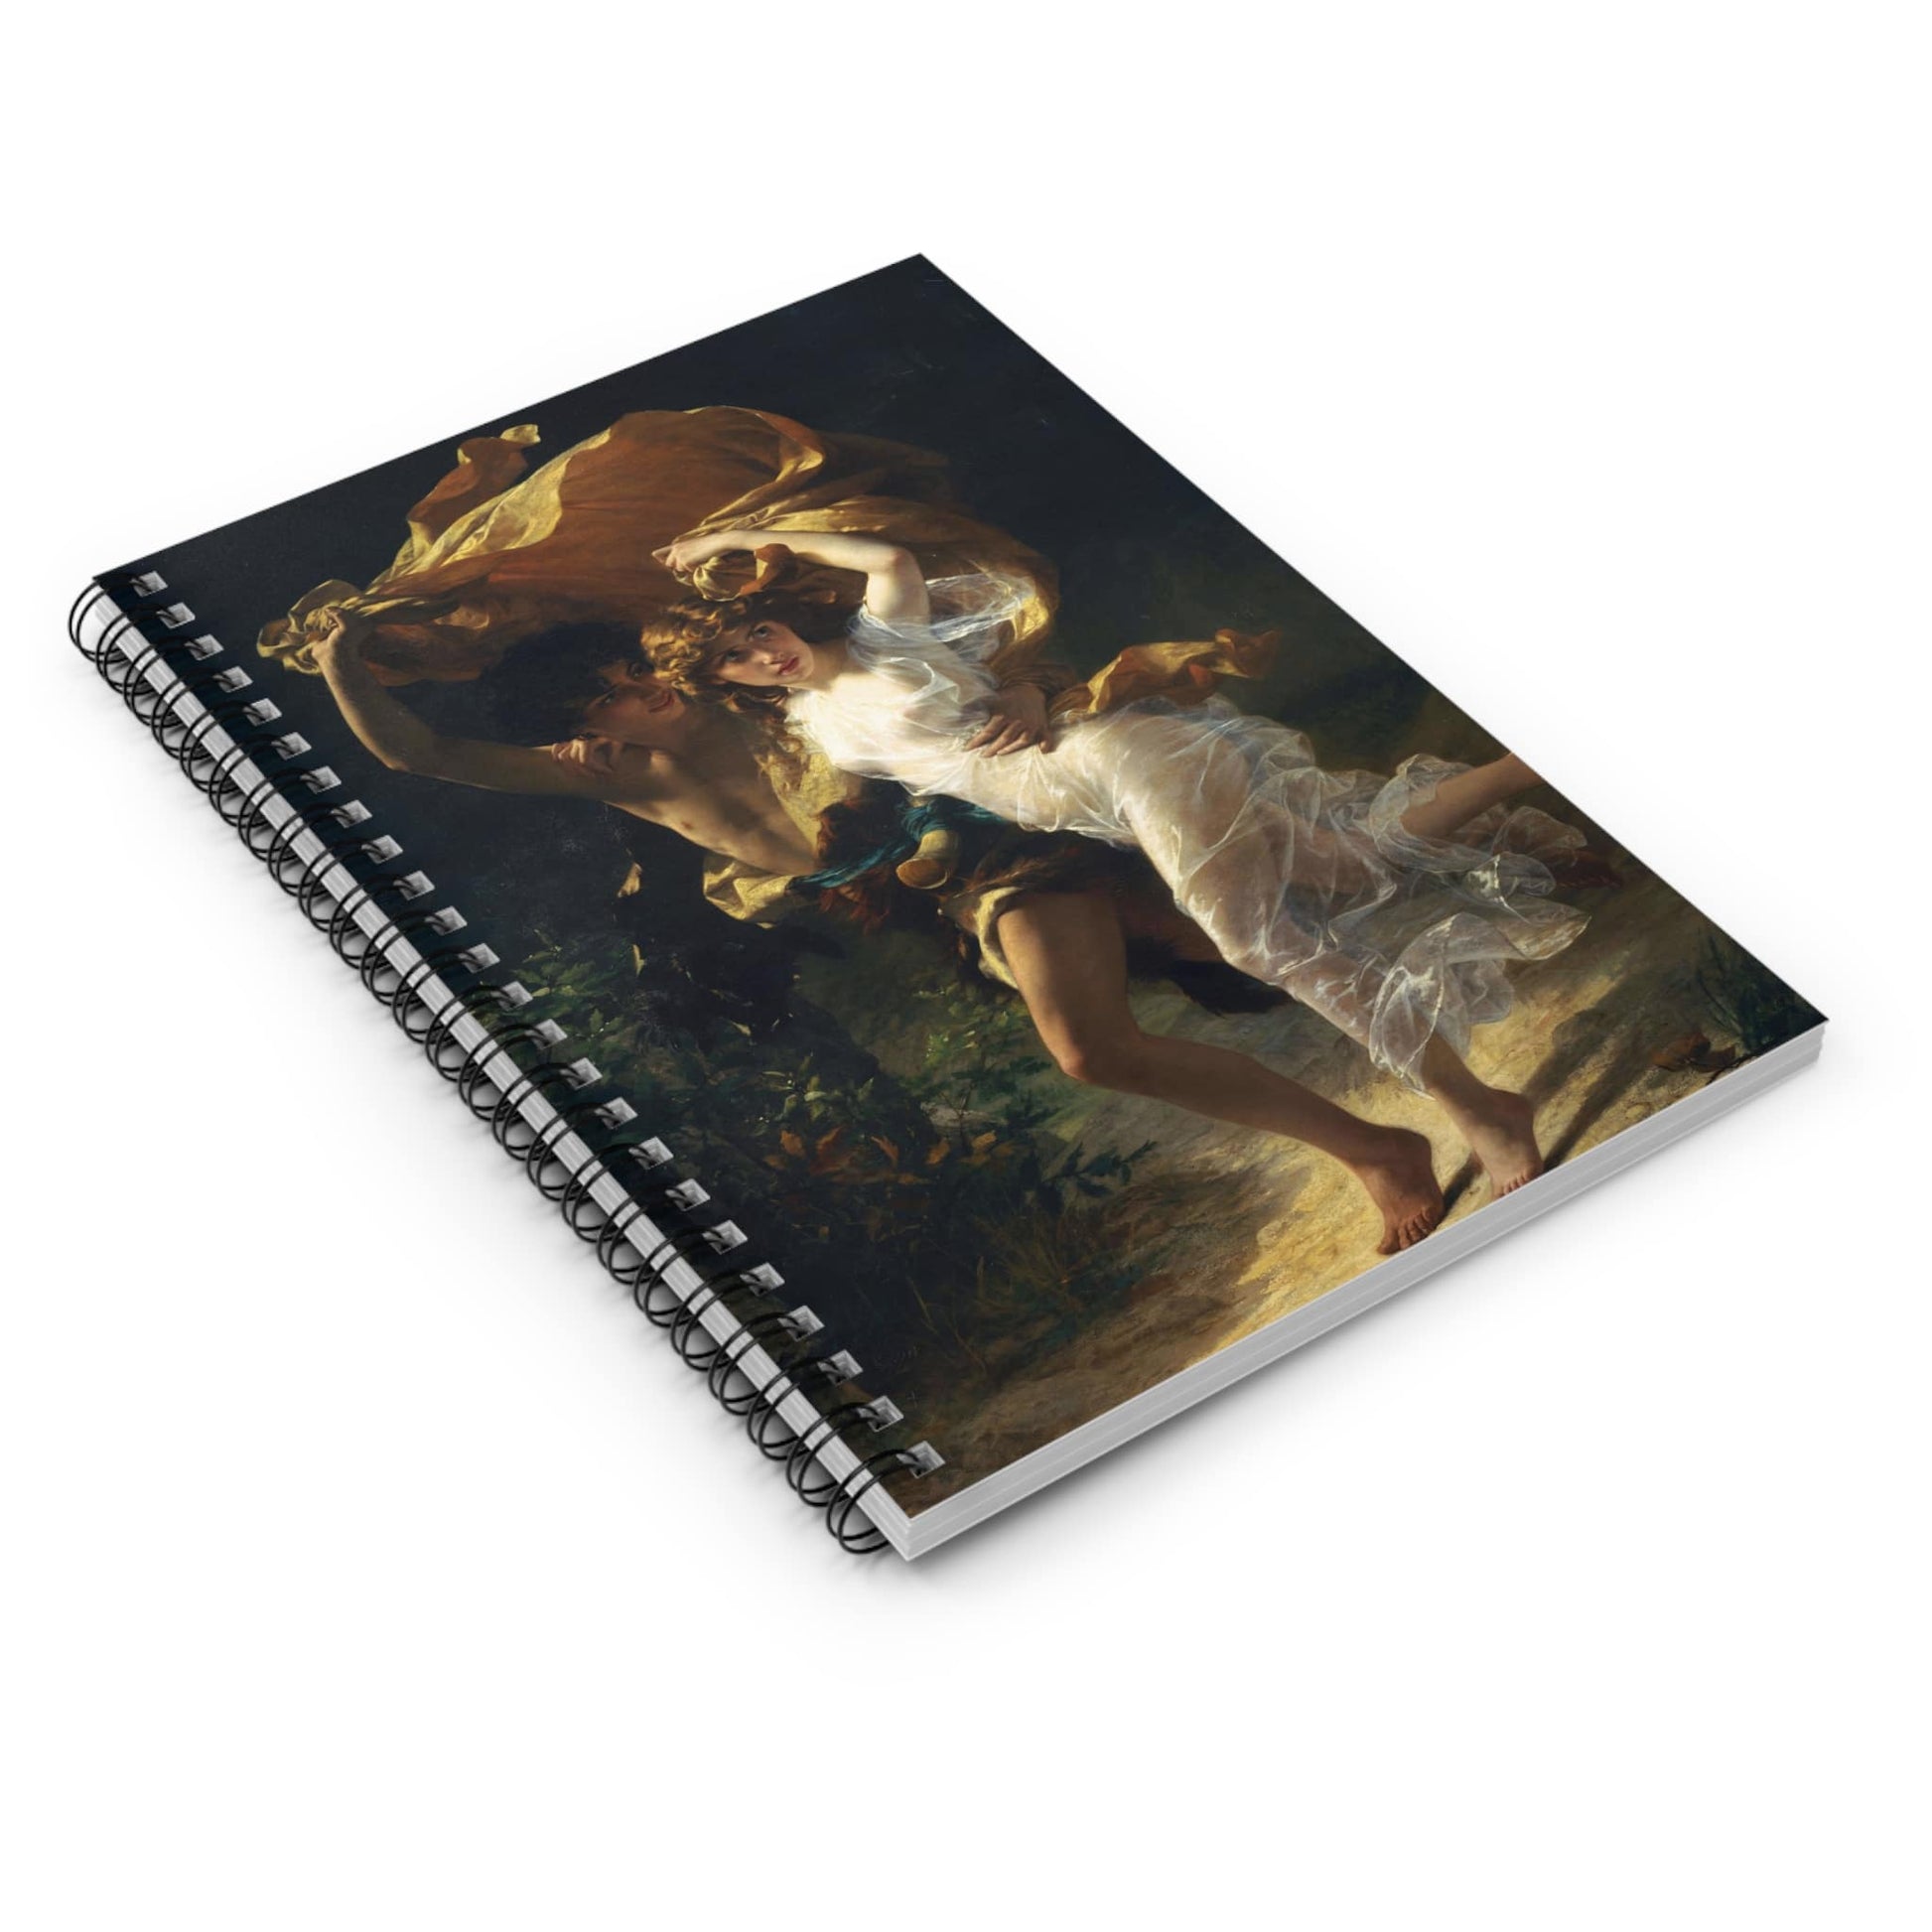 Victorian Lovers Spiral Notebook Laying Flat on White Surface